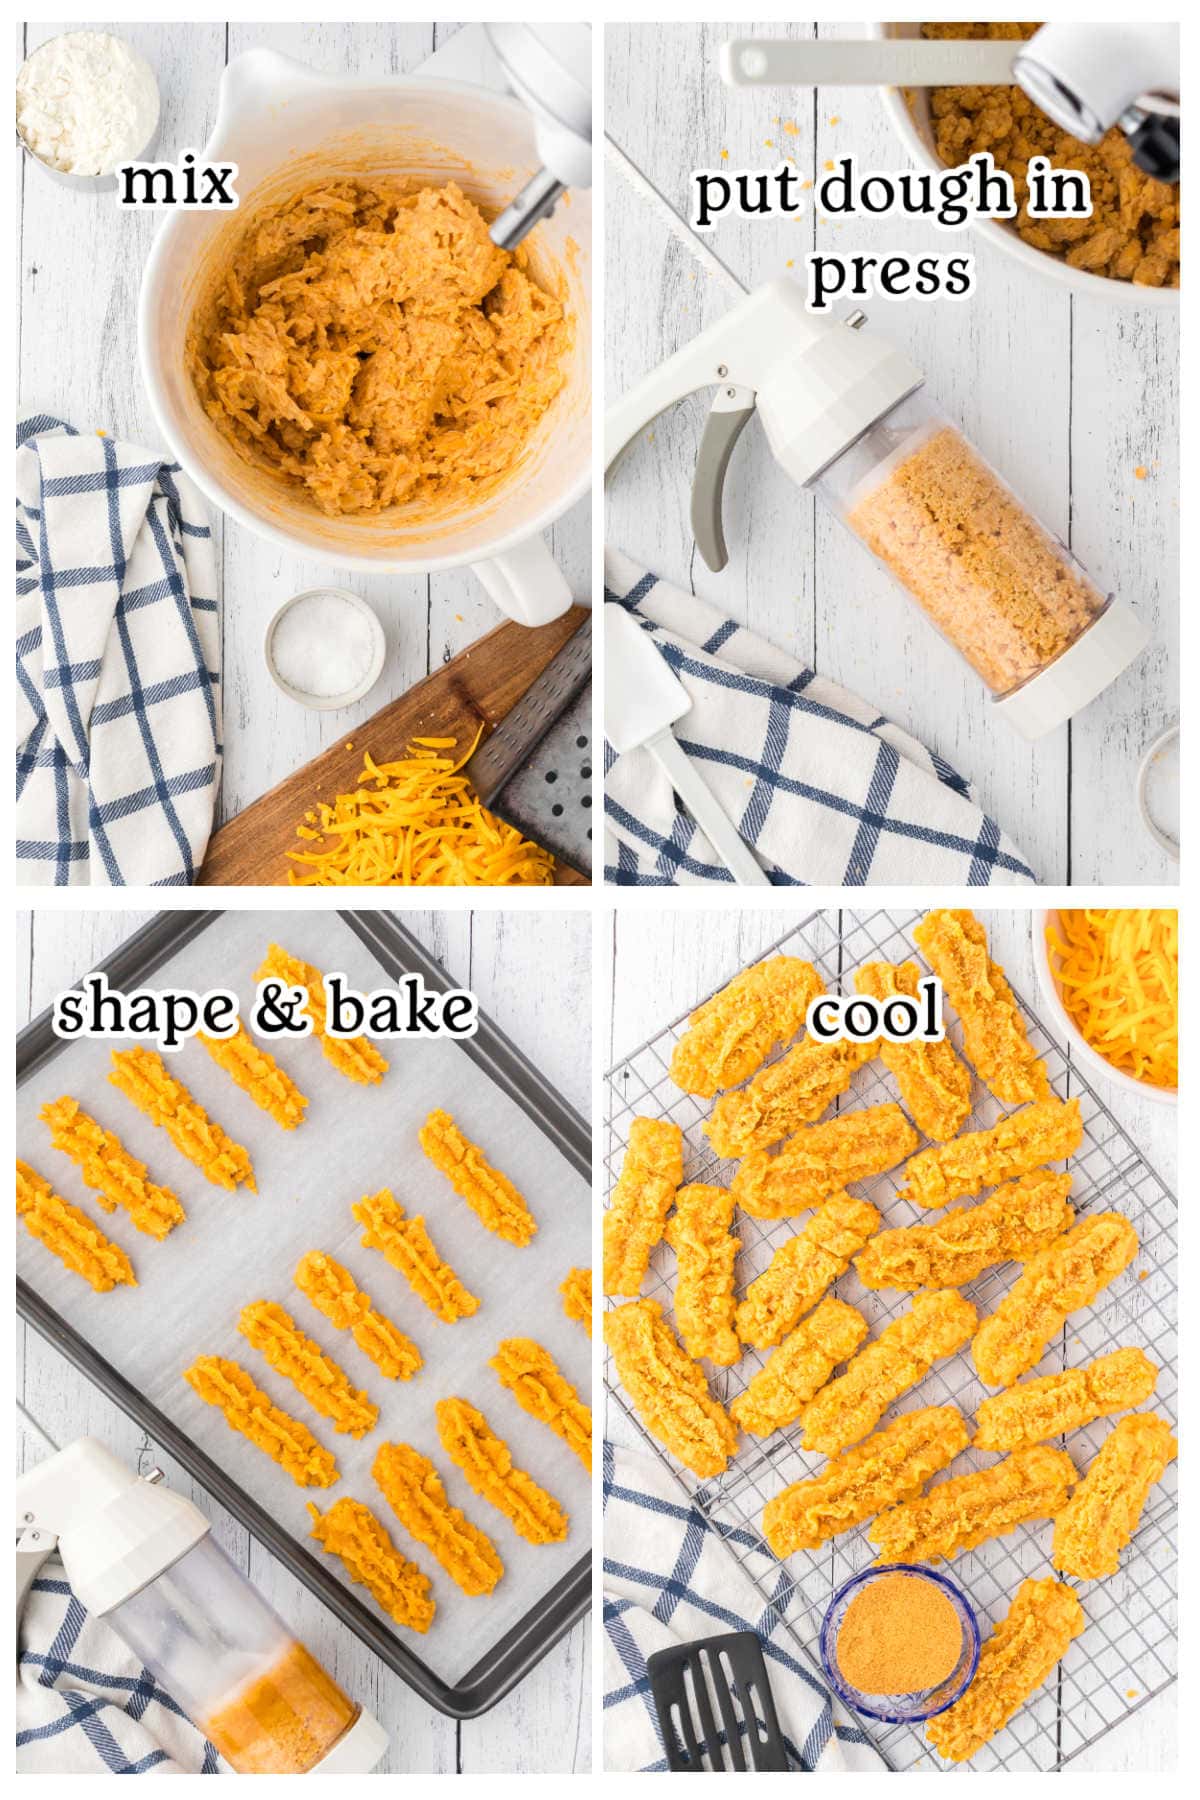 Four overhead images in a grid with text overlay, depicting the recipe steps.